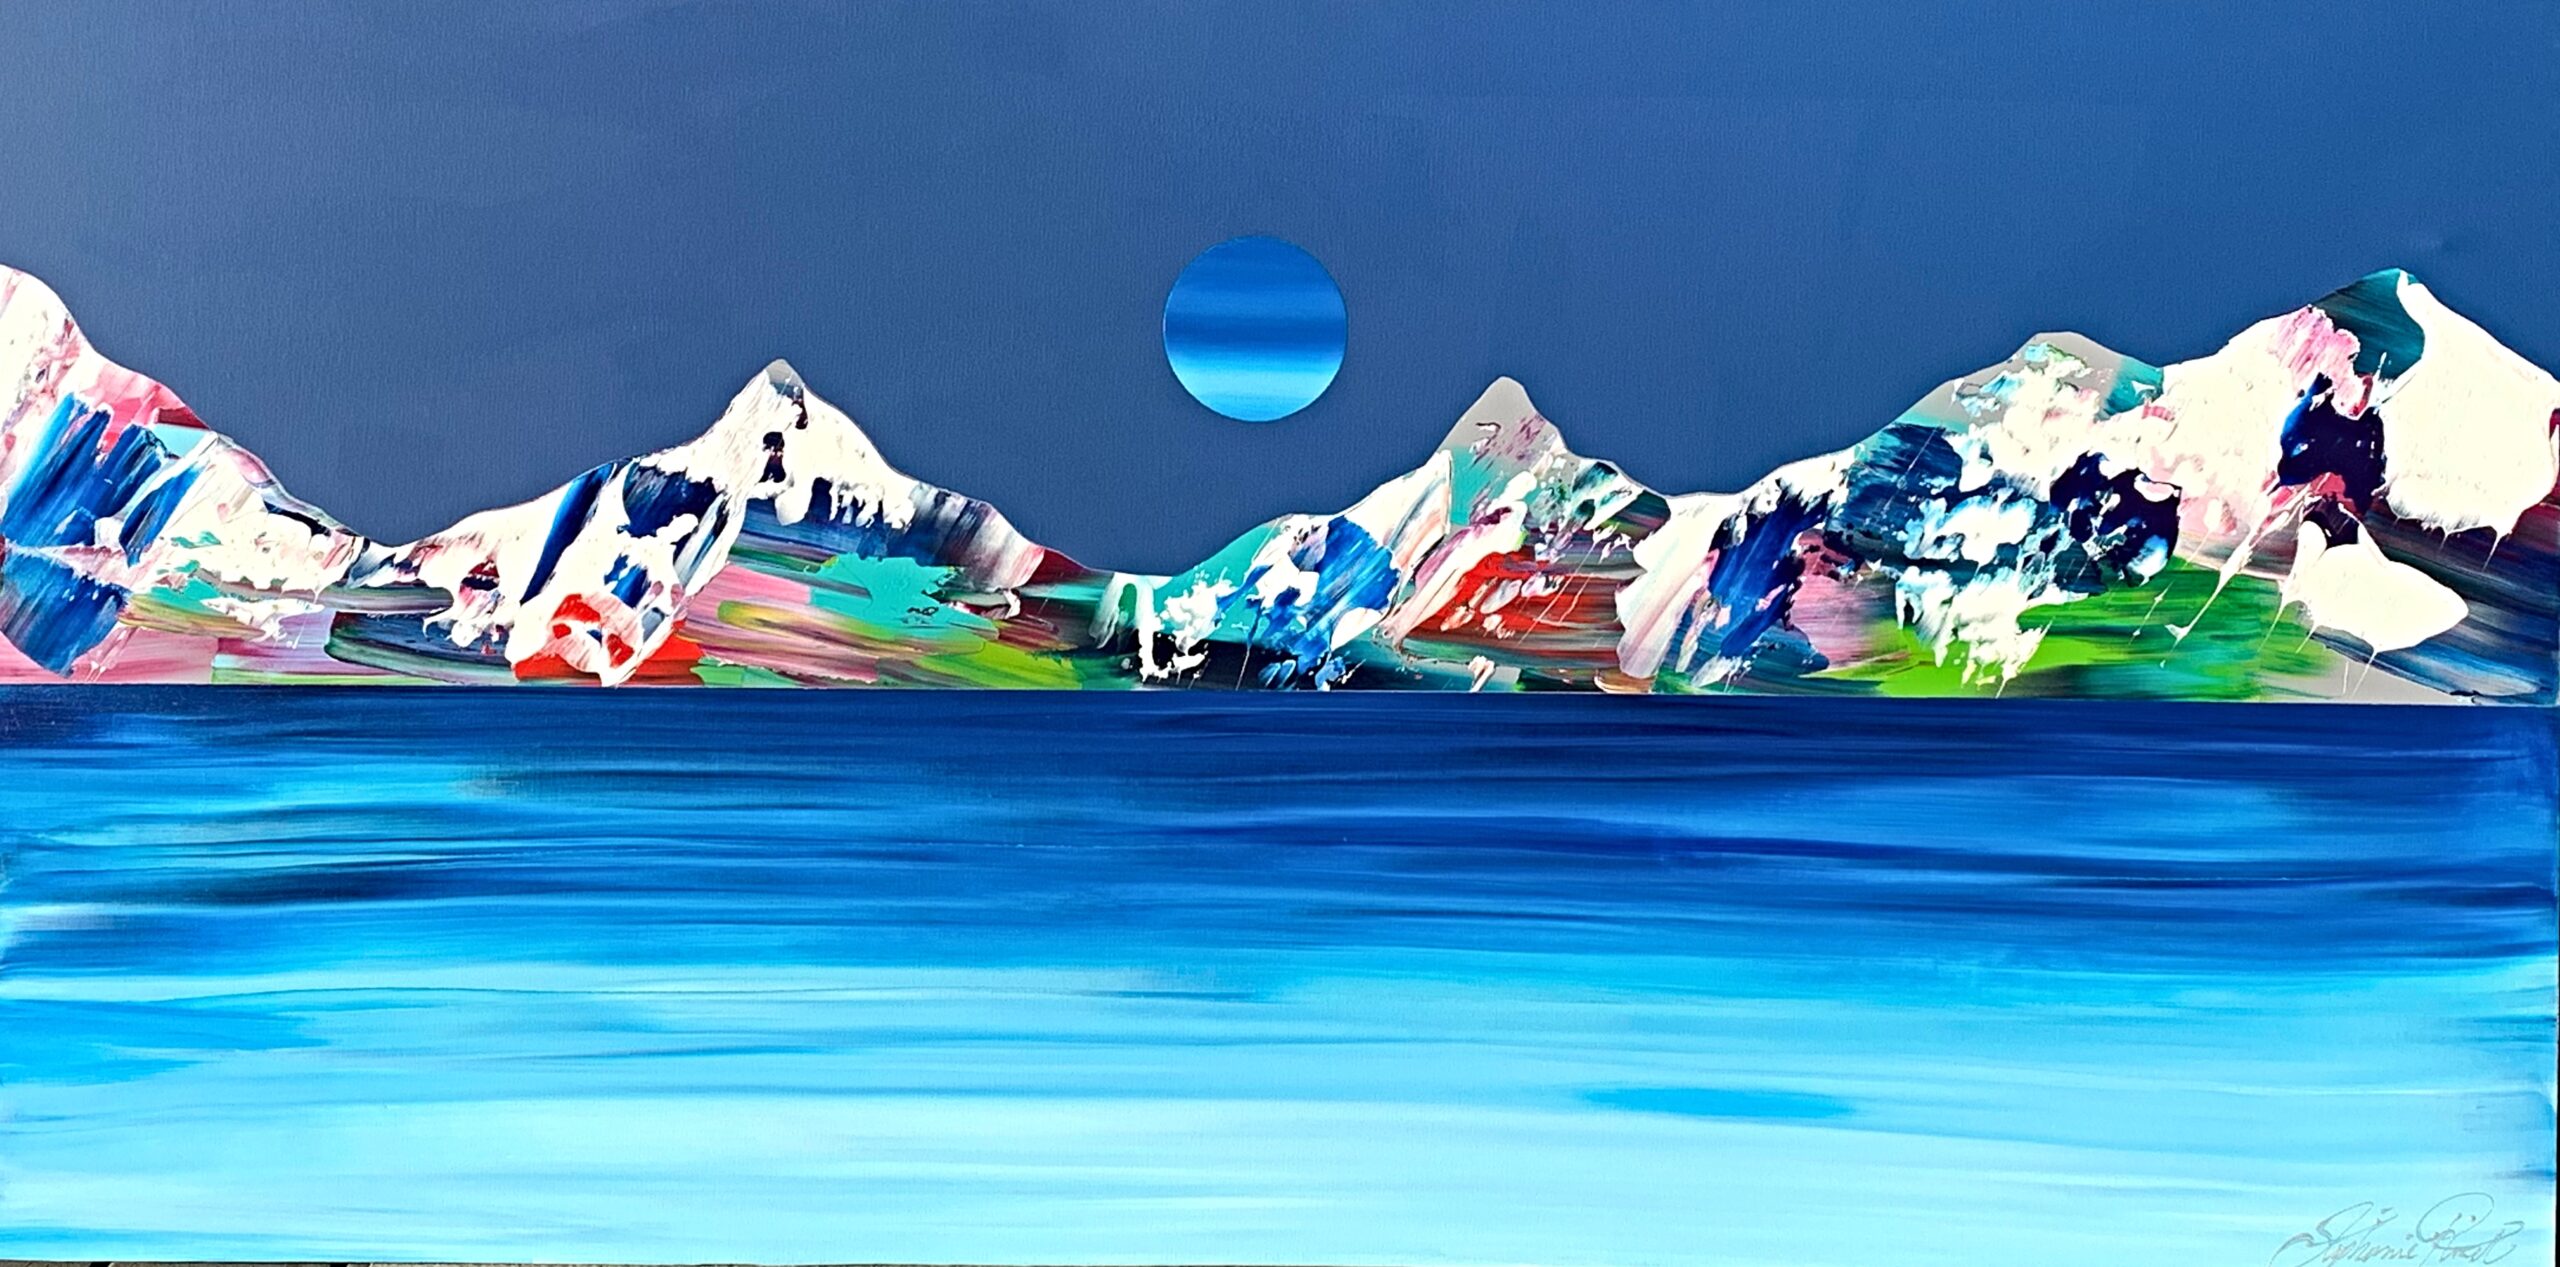 Rocheuses 1822, acrylic mountain painting by Stephanie Rivet | Effusion Art Gallery + Cast Glass Studio, Invermere BC